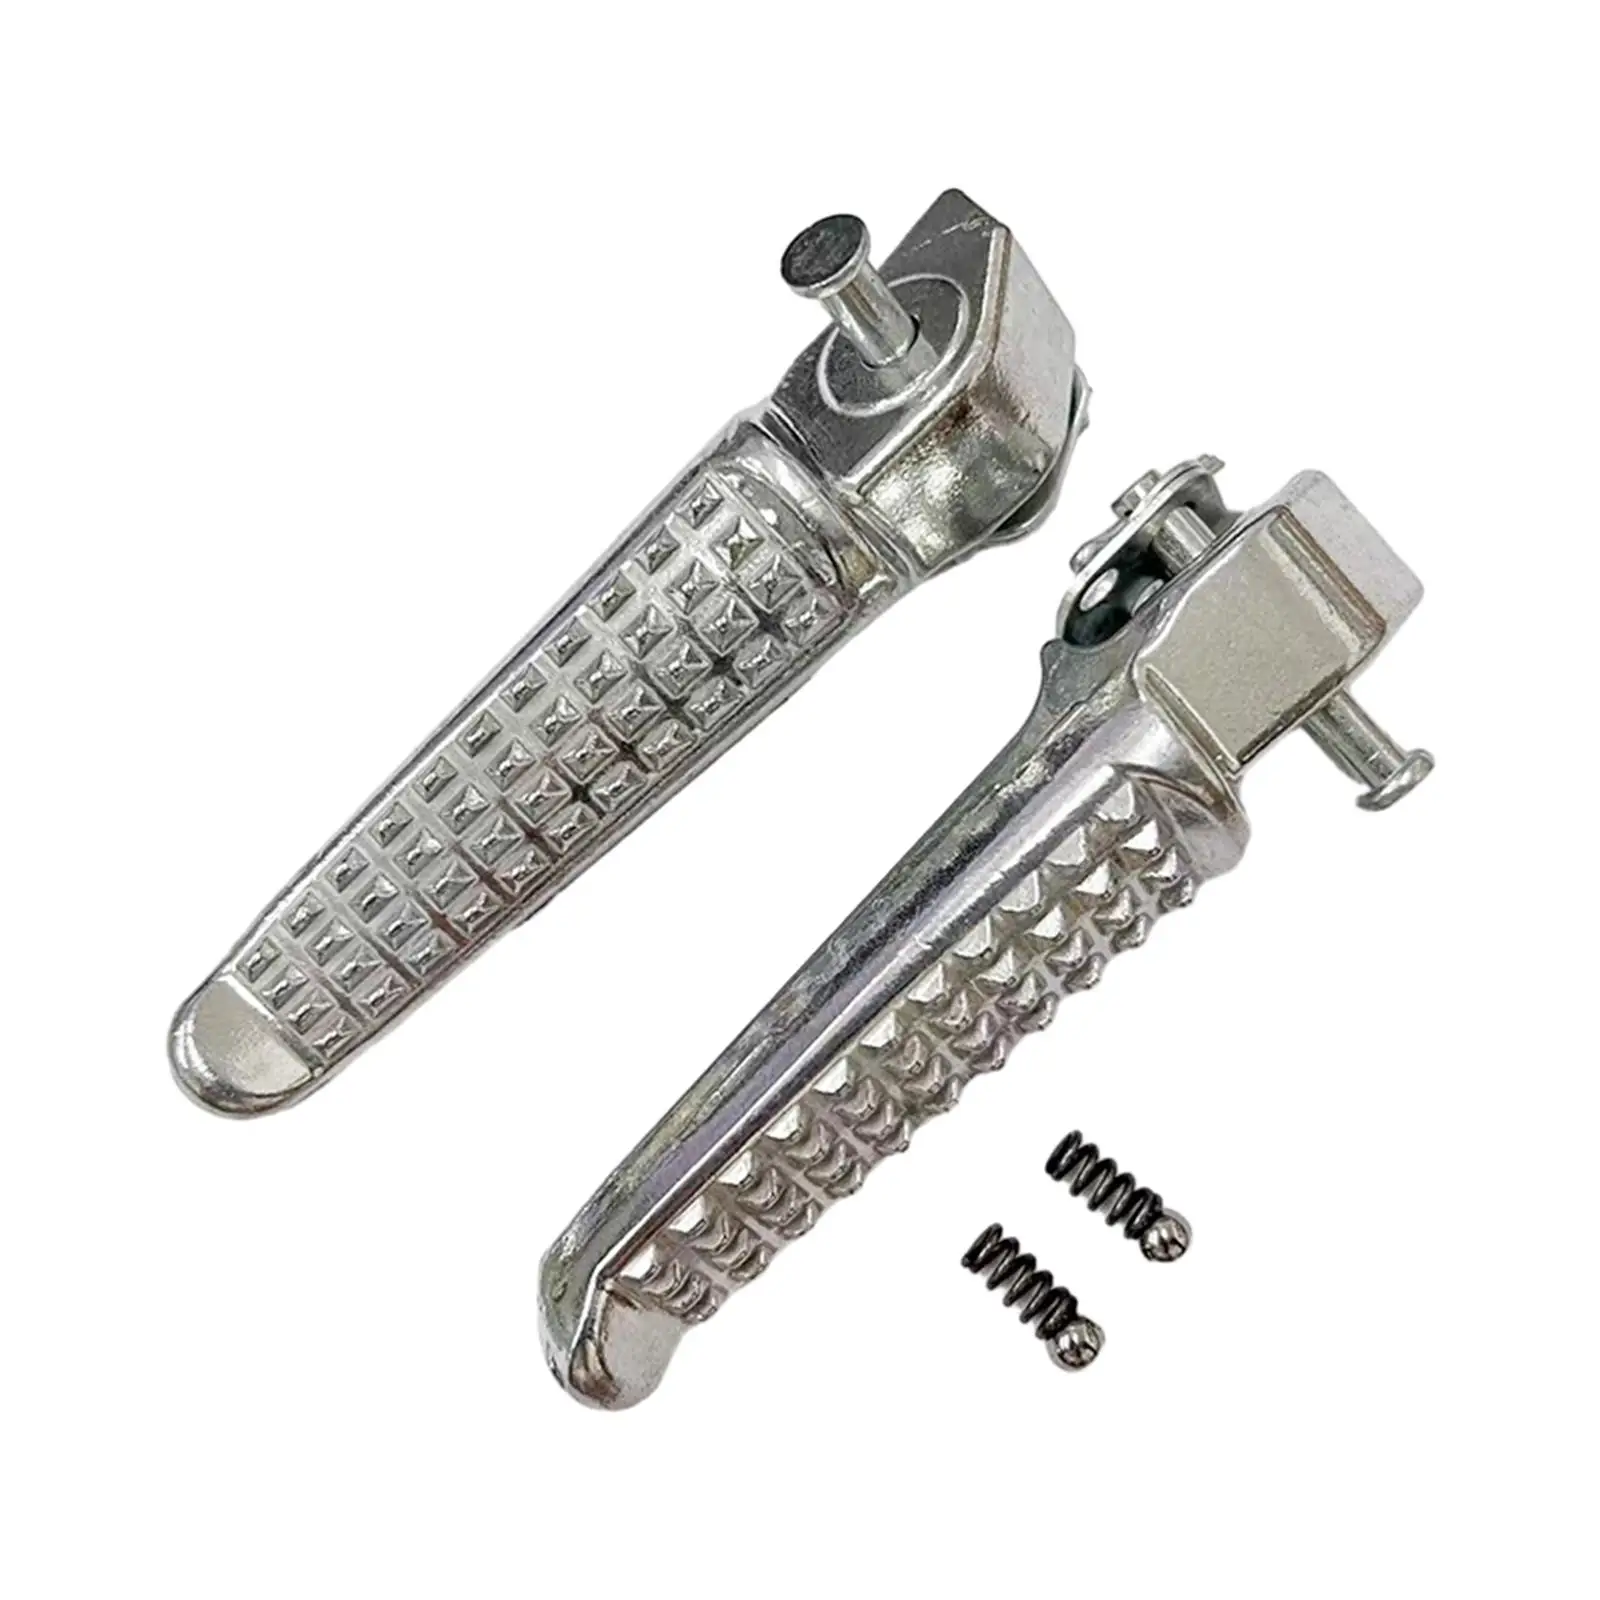 2Pcs Motorcycle Rear Foot Pegs Direct Replaces Easy Installation Durable 115x18mm Motorcycle Accessories Stainless Steel